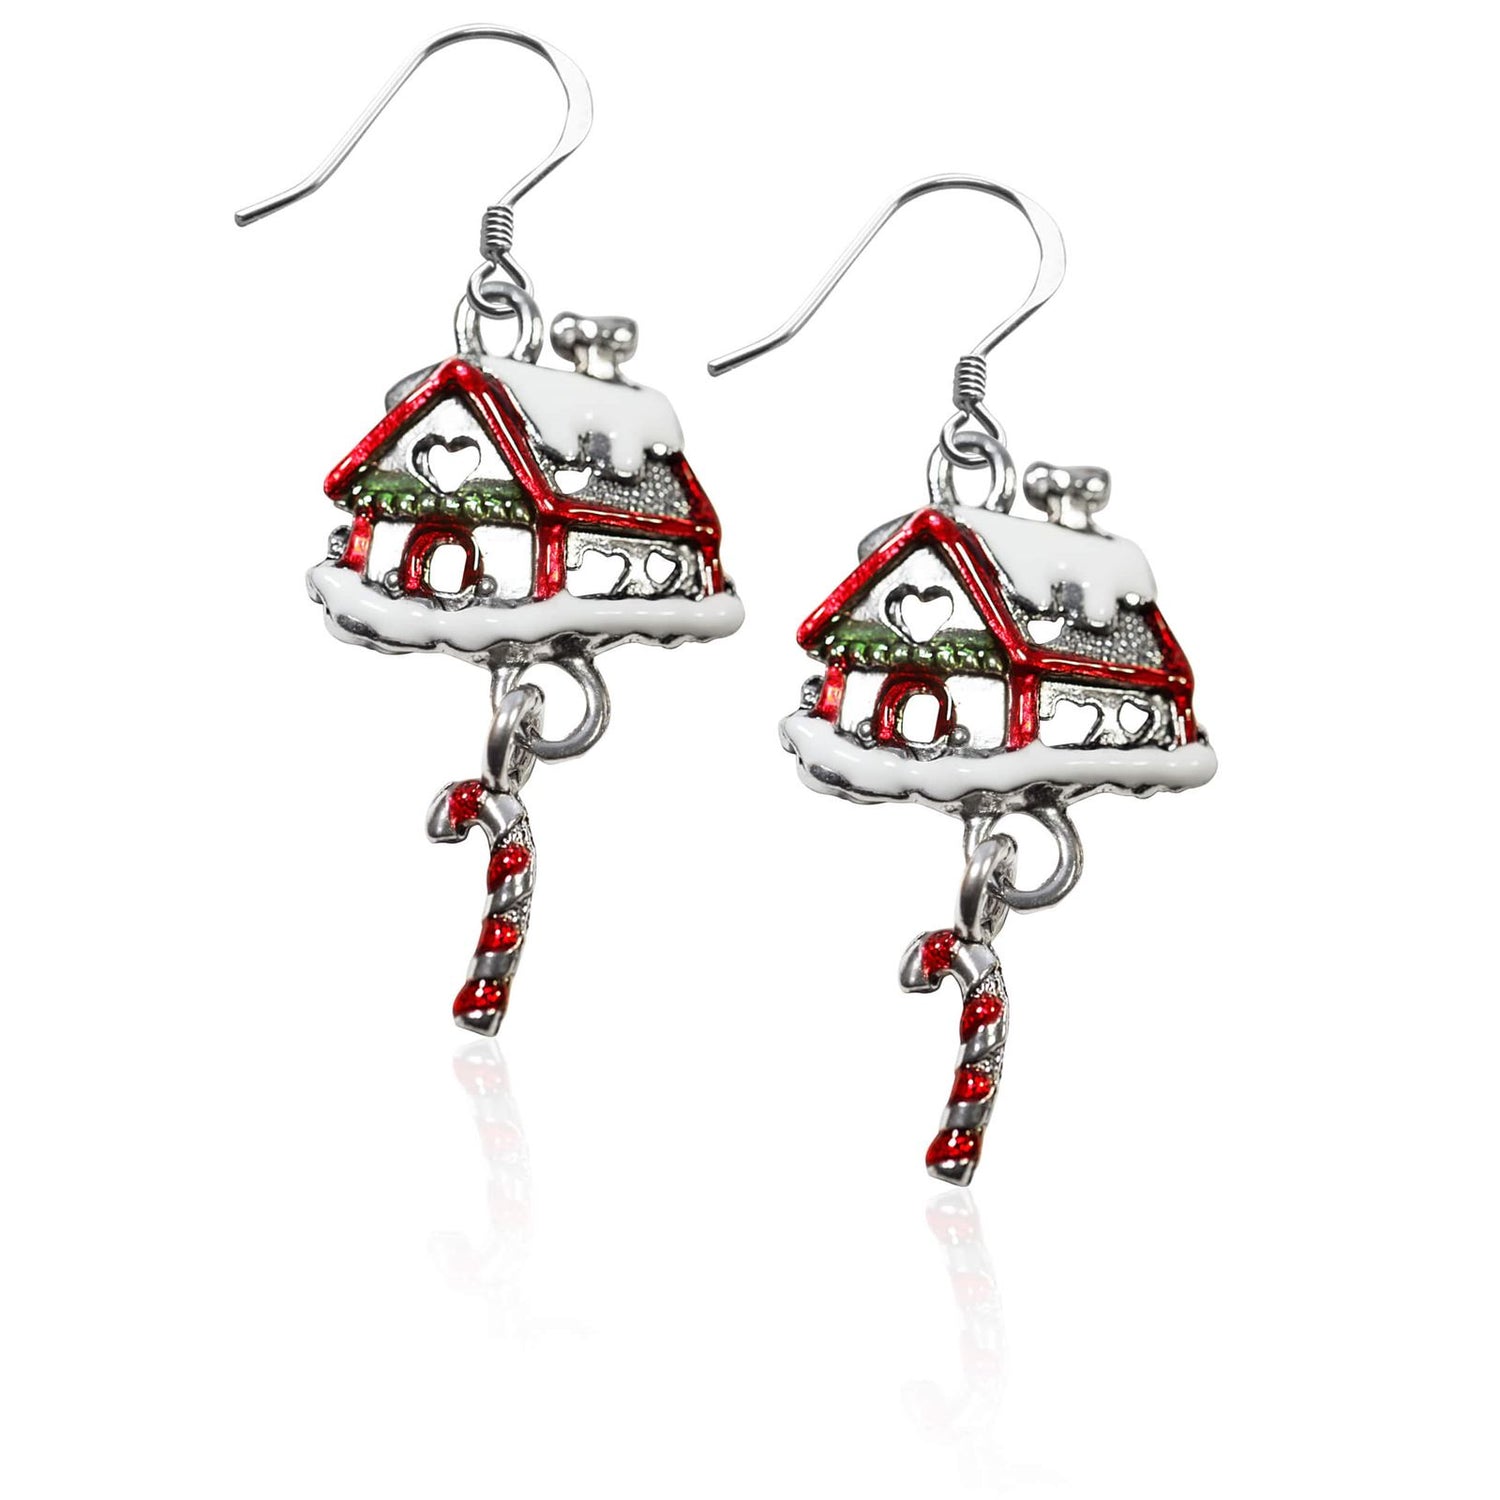 Whimsical Gifts | Christmas Gingerbread House Charm Earrings in Silver Finish | Holiday & Seasonal Themed | Christmas | Jewelry